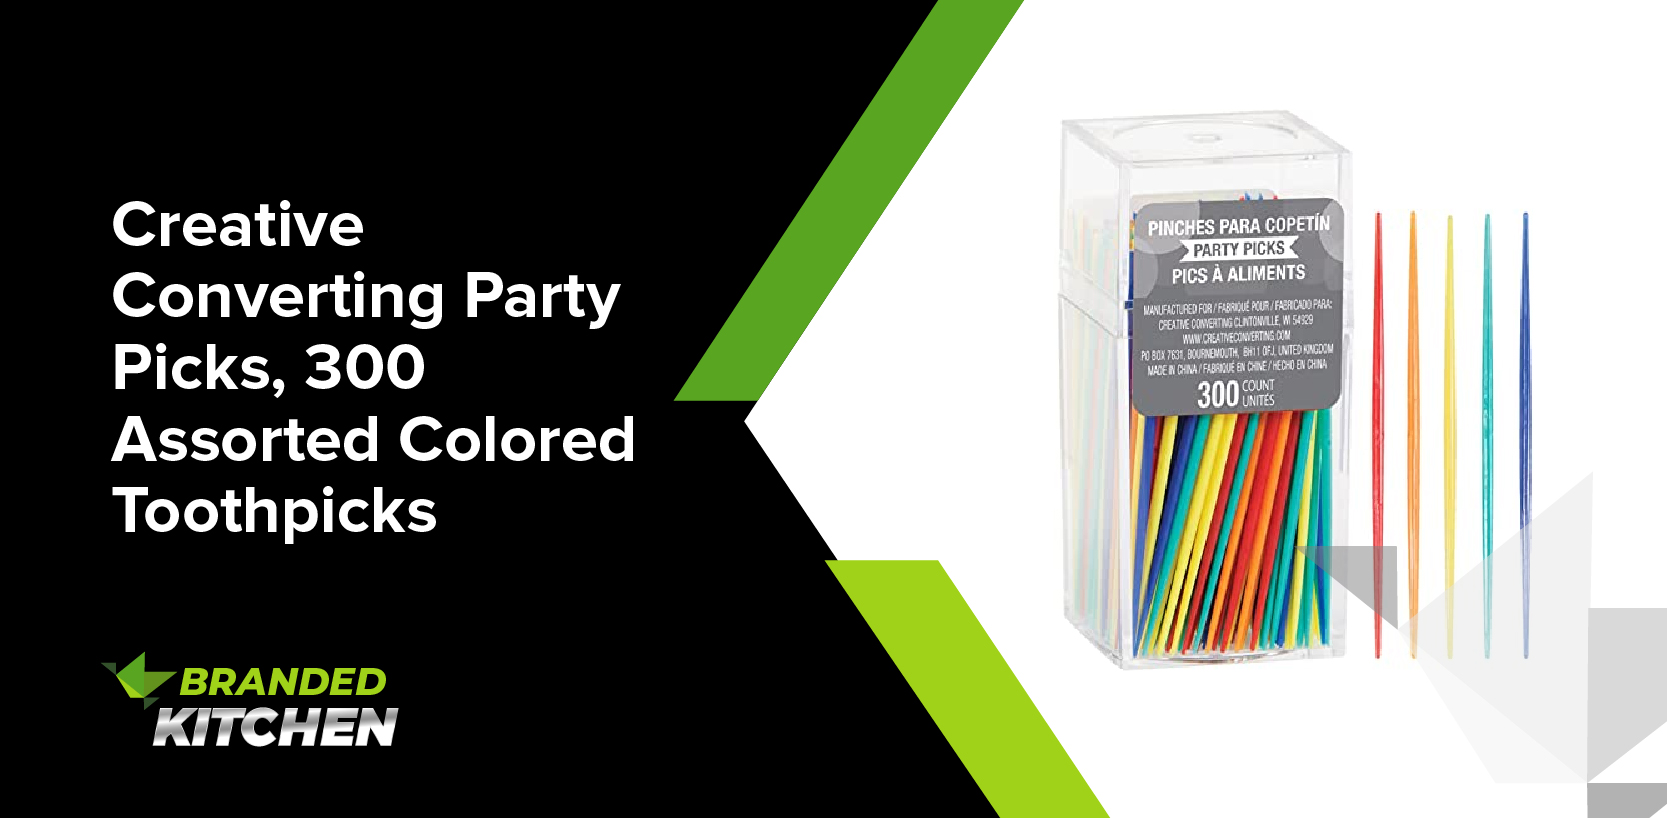 Creative Converting Party Picks, 300 Assorted Colored Toothpicks